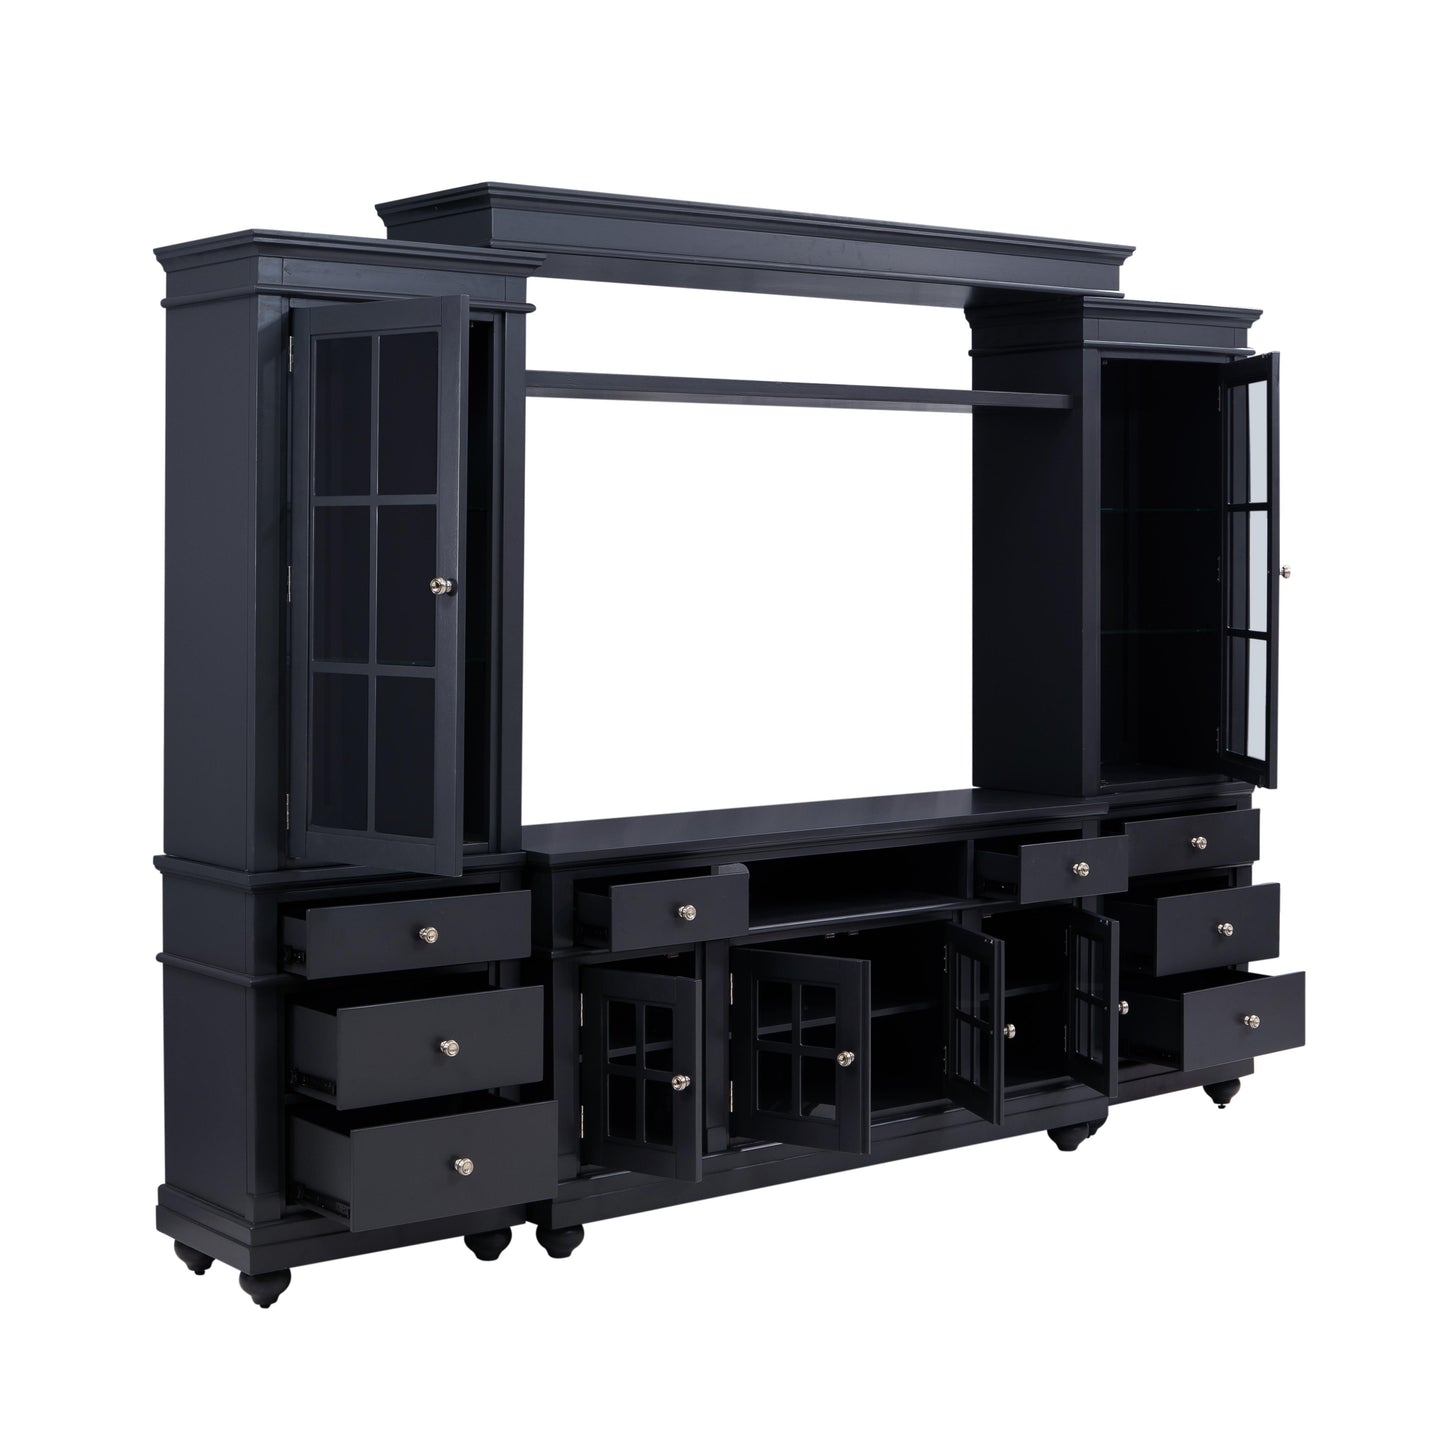 Tov Furniture Hampton Charcoal Entertainment Center for TVs up to 65"